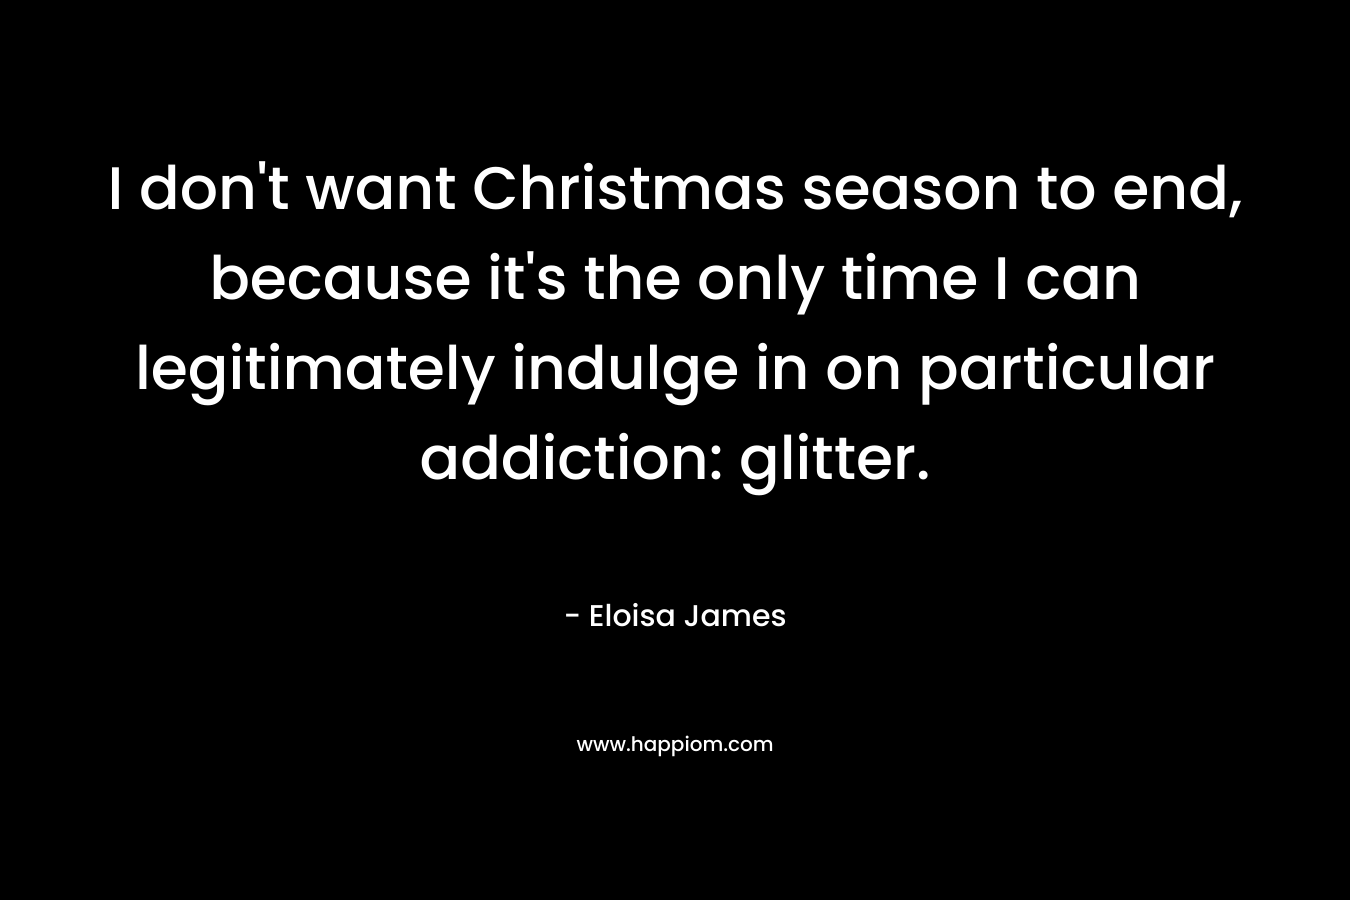 I don’t want Christmas season to end, because it’s the only time I can legitimately indulge in on particular addiction: glitter. – Eloisa James